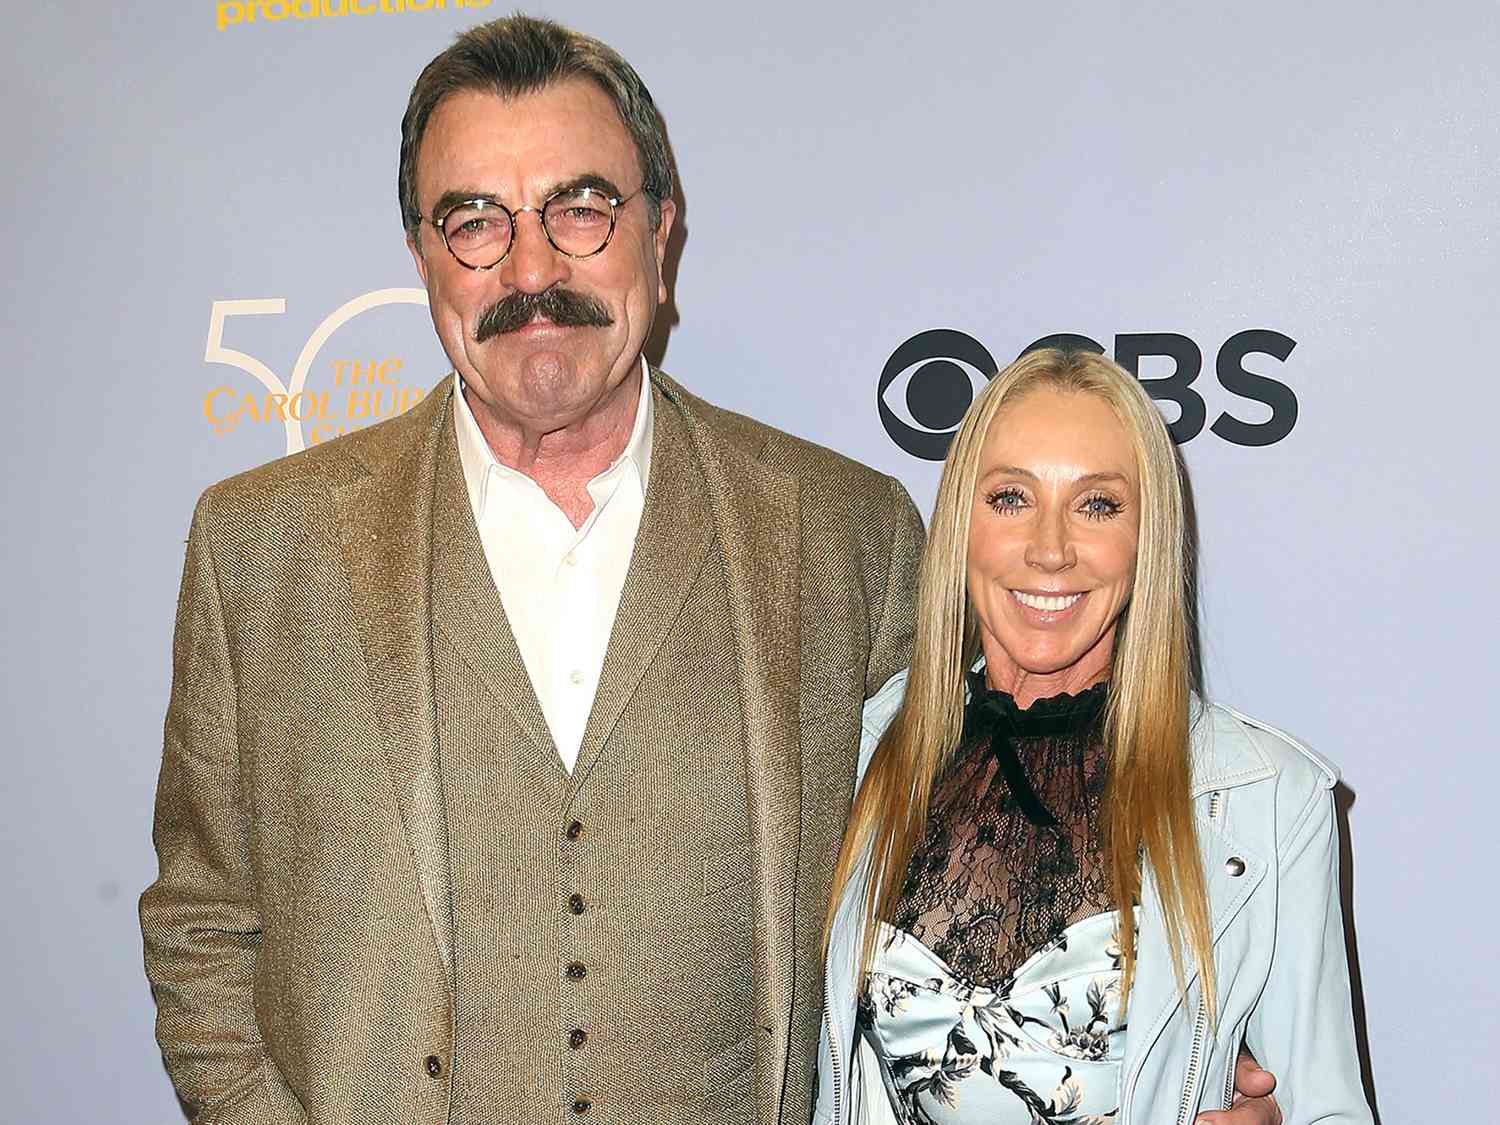 Tom Selleck and Jillie Mack attend the CBS' "The Carol Burnett Show 50th Anniversary Special" at CBS Televison City on October 4, 2017 in Los Angeles, California